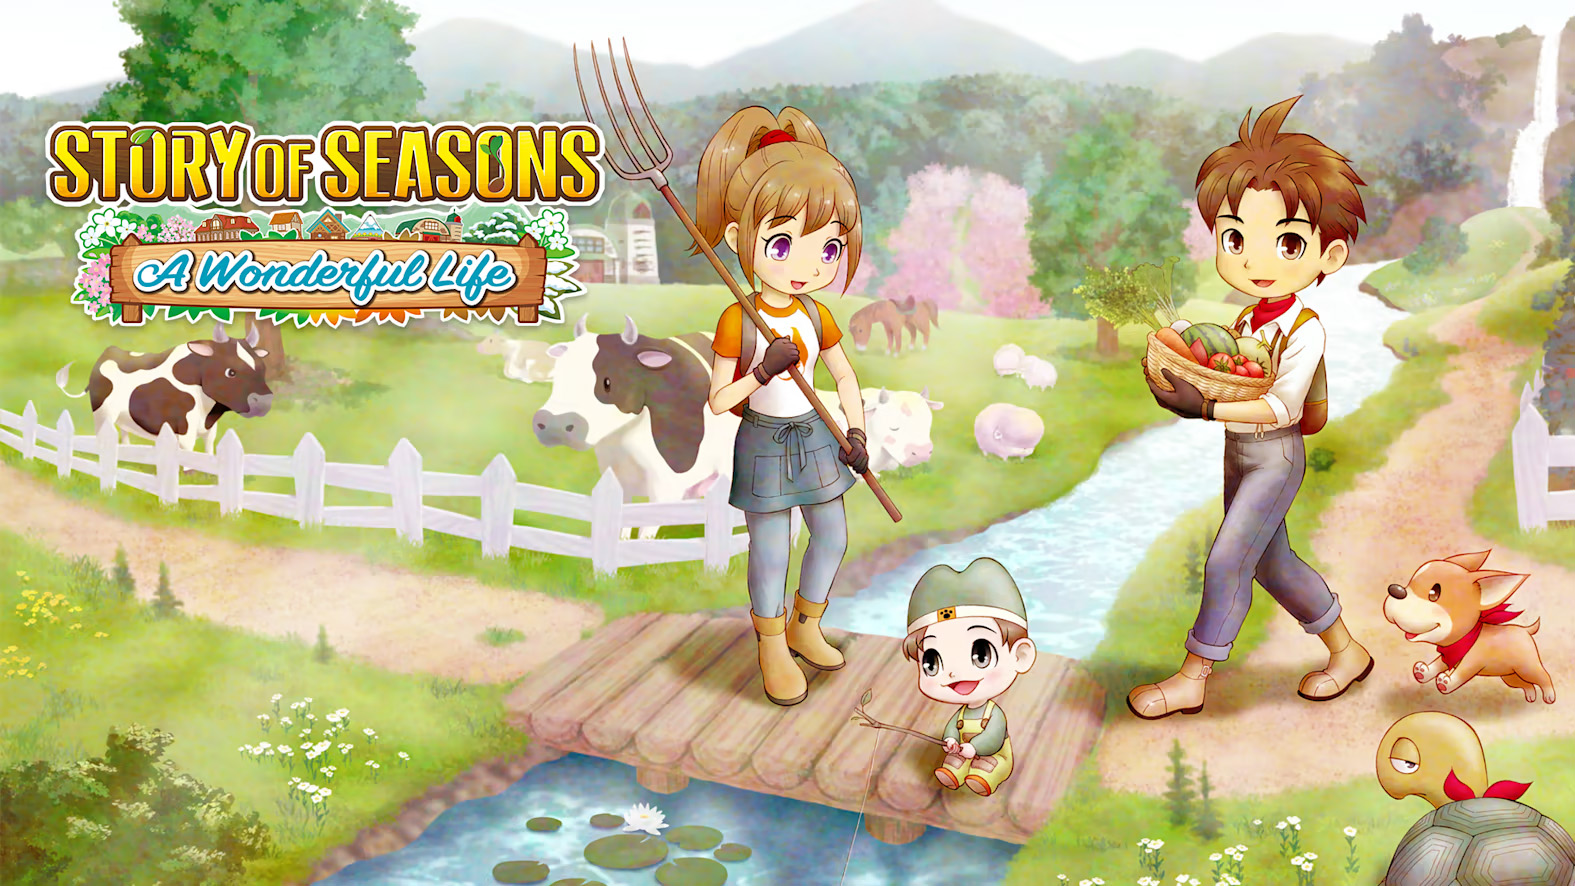 Story of Seasons: A Wonderful Life Remakes Classic Harvest Moon